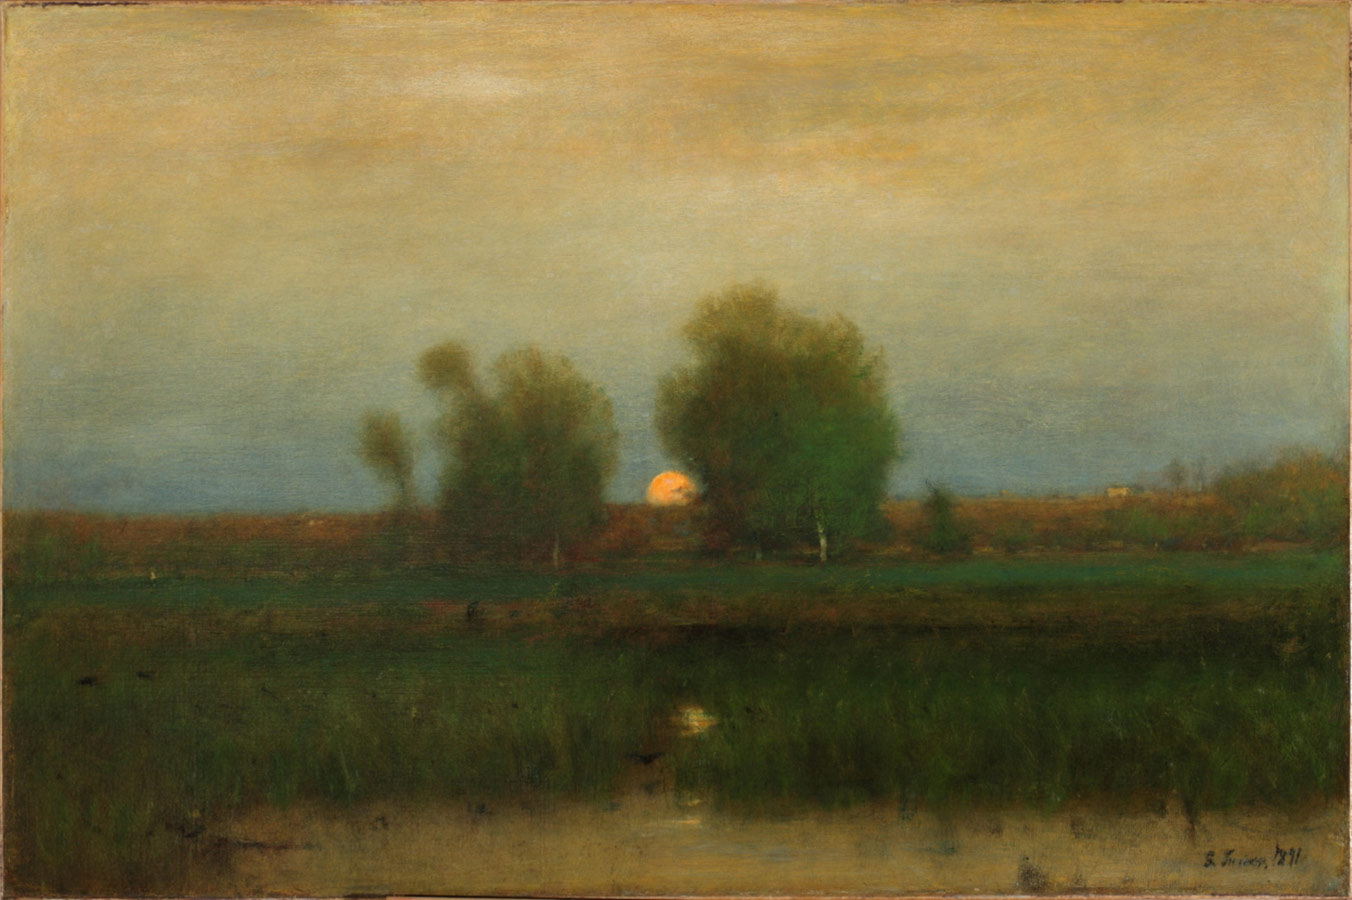 George Inness, 1825-1894, Moonrise, Alexandria Bay, 1891, Oil on canvas, 30 ¼ x 45 ¼ in., Westmoreland Museum of American Art. Bequest of Richard M. Scaife, 2015.65